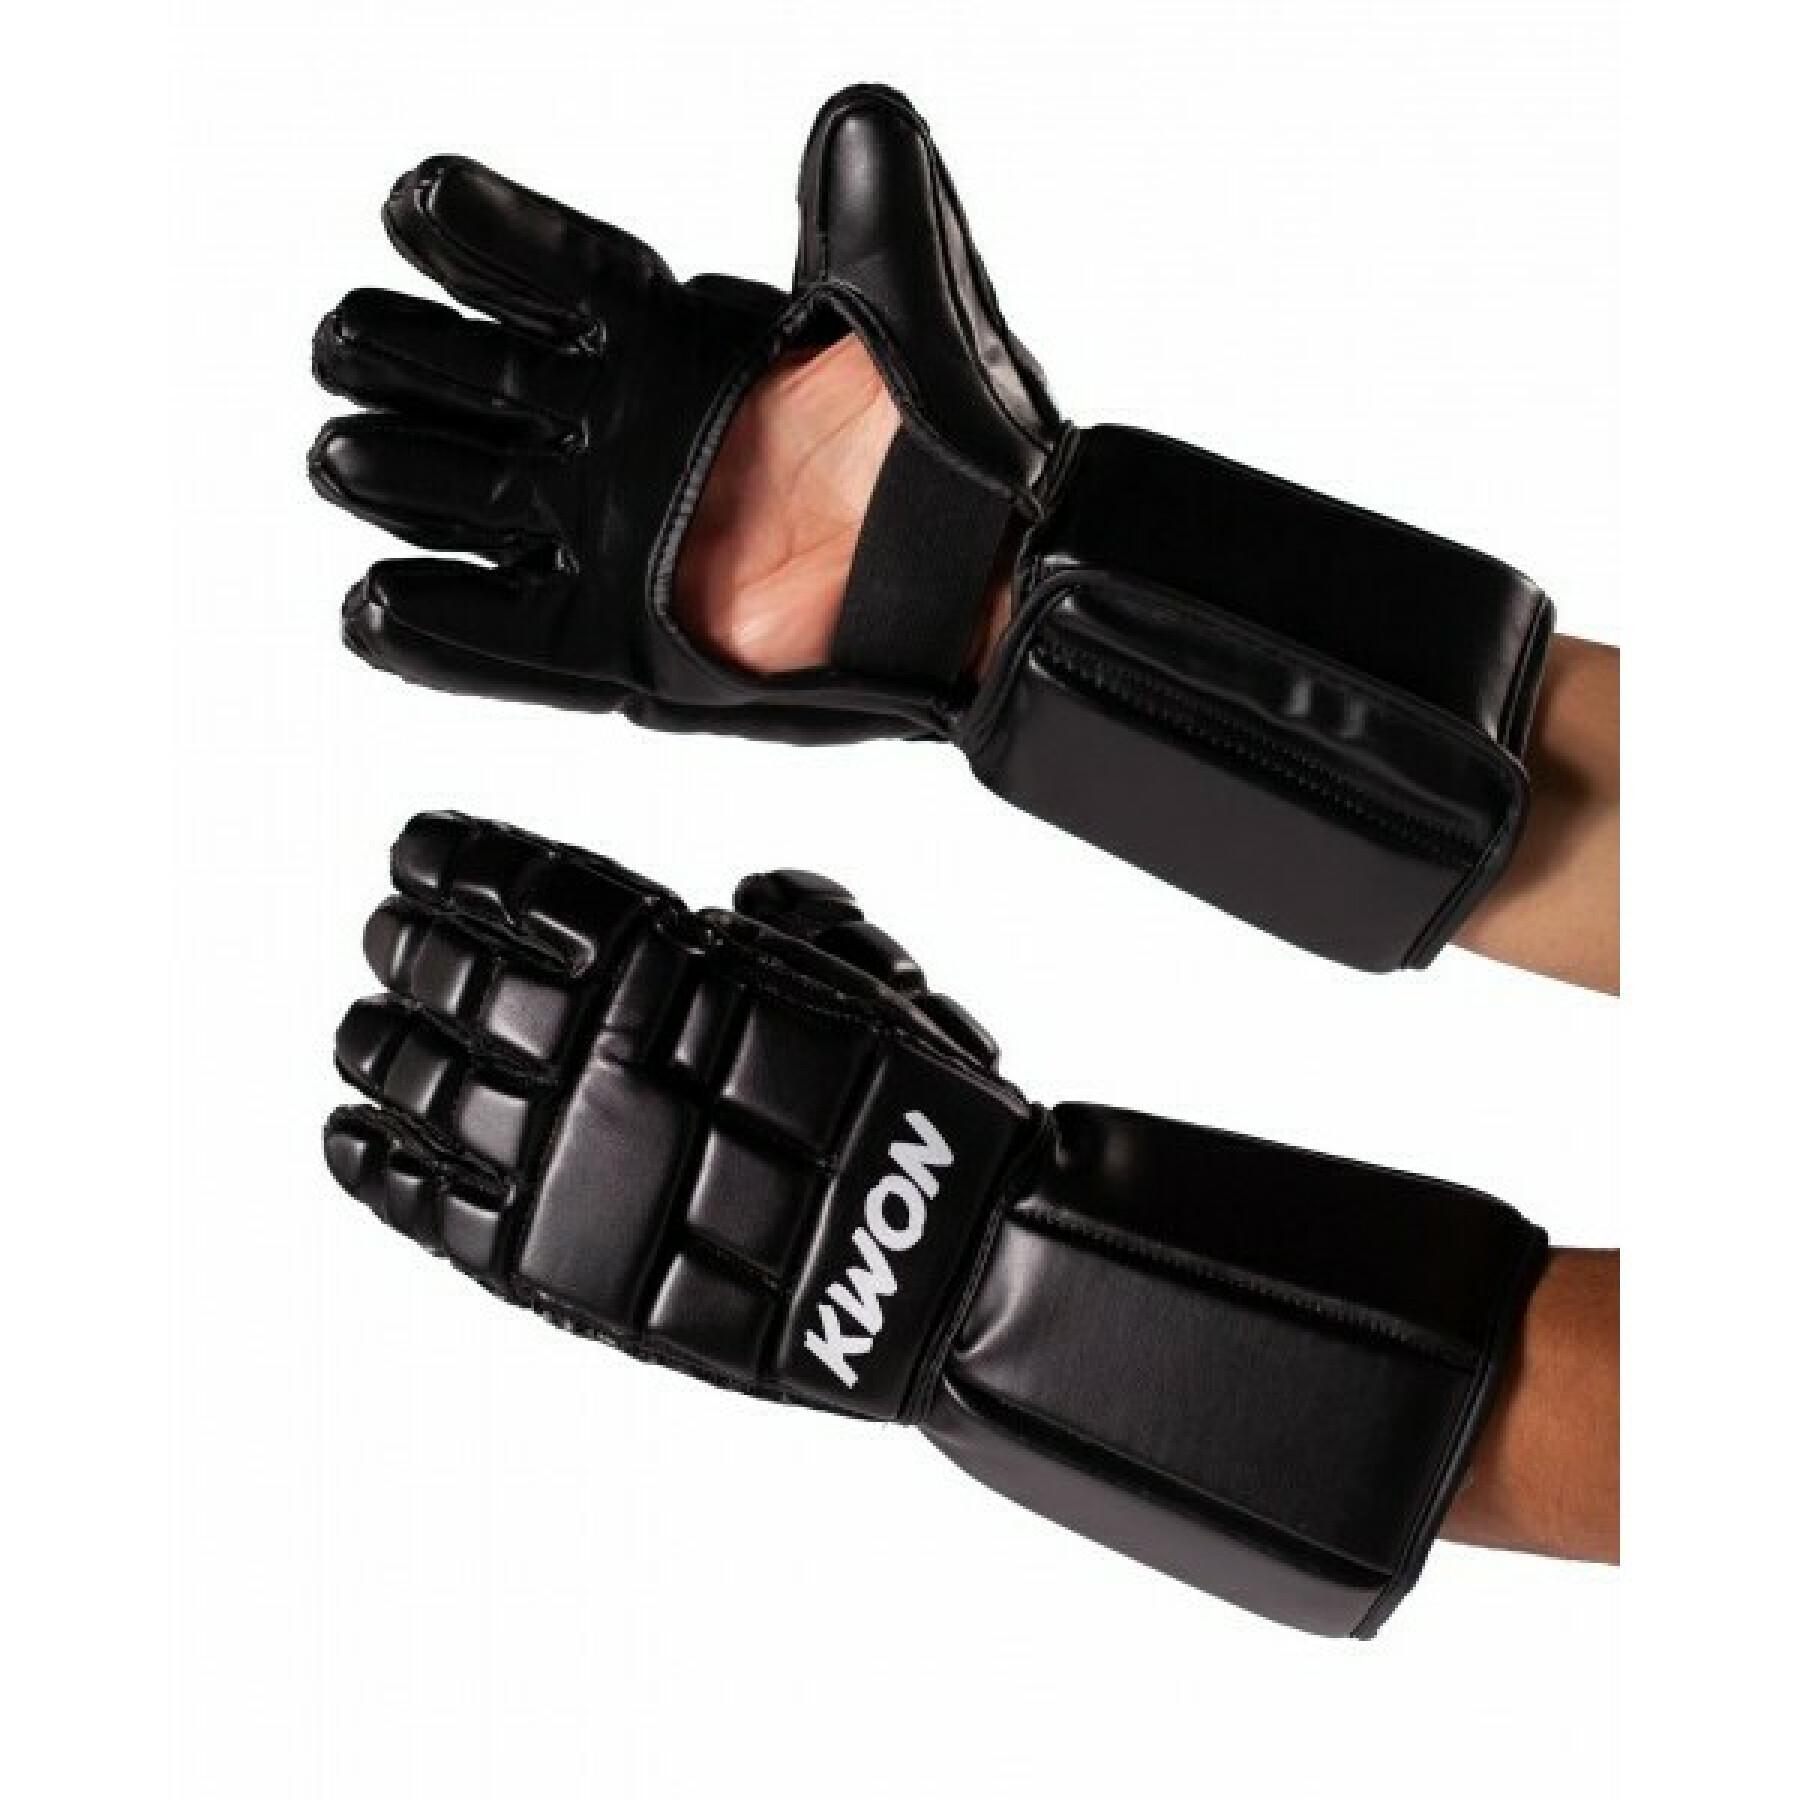 eskrima gloves with forearm protection Kwon